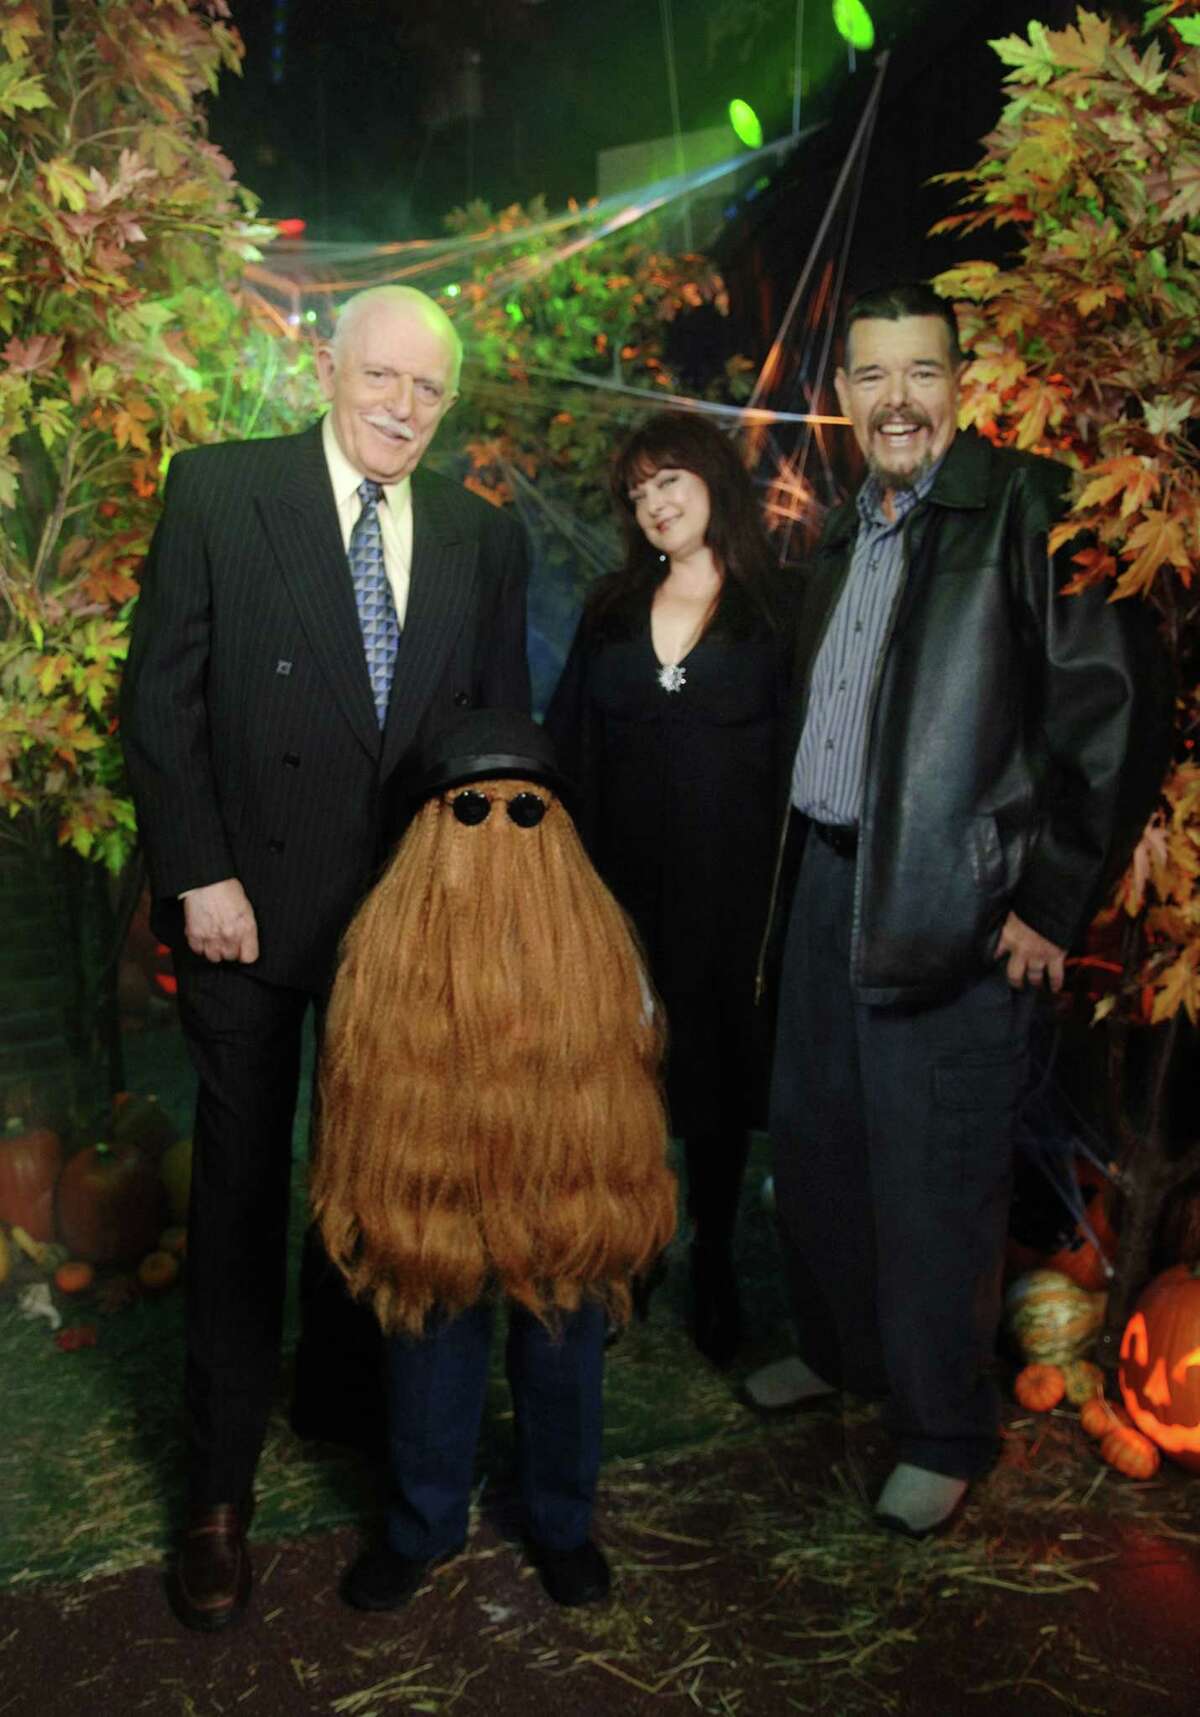 This Oct. 31, 2006 photo provided by ABC, shows some of the original cast of the TV show, “The Addams Family,” from left, John Astin, (Gomez Addams), Felix Silla, (Cousin Itt), Lisa Loring, (Wednesday Addams) and Ken Weatherwax, (Pugsley Addams), reunited at a special Halloween edition of ABC’s “Good Morning America” outside their Times Square studios in New York. Weatherwax, who played the child character Pugsley on “The Addams Family” television series in the 1960s, has died. He was 59.